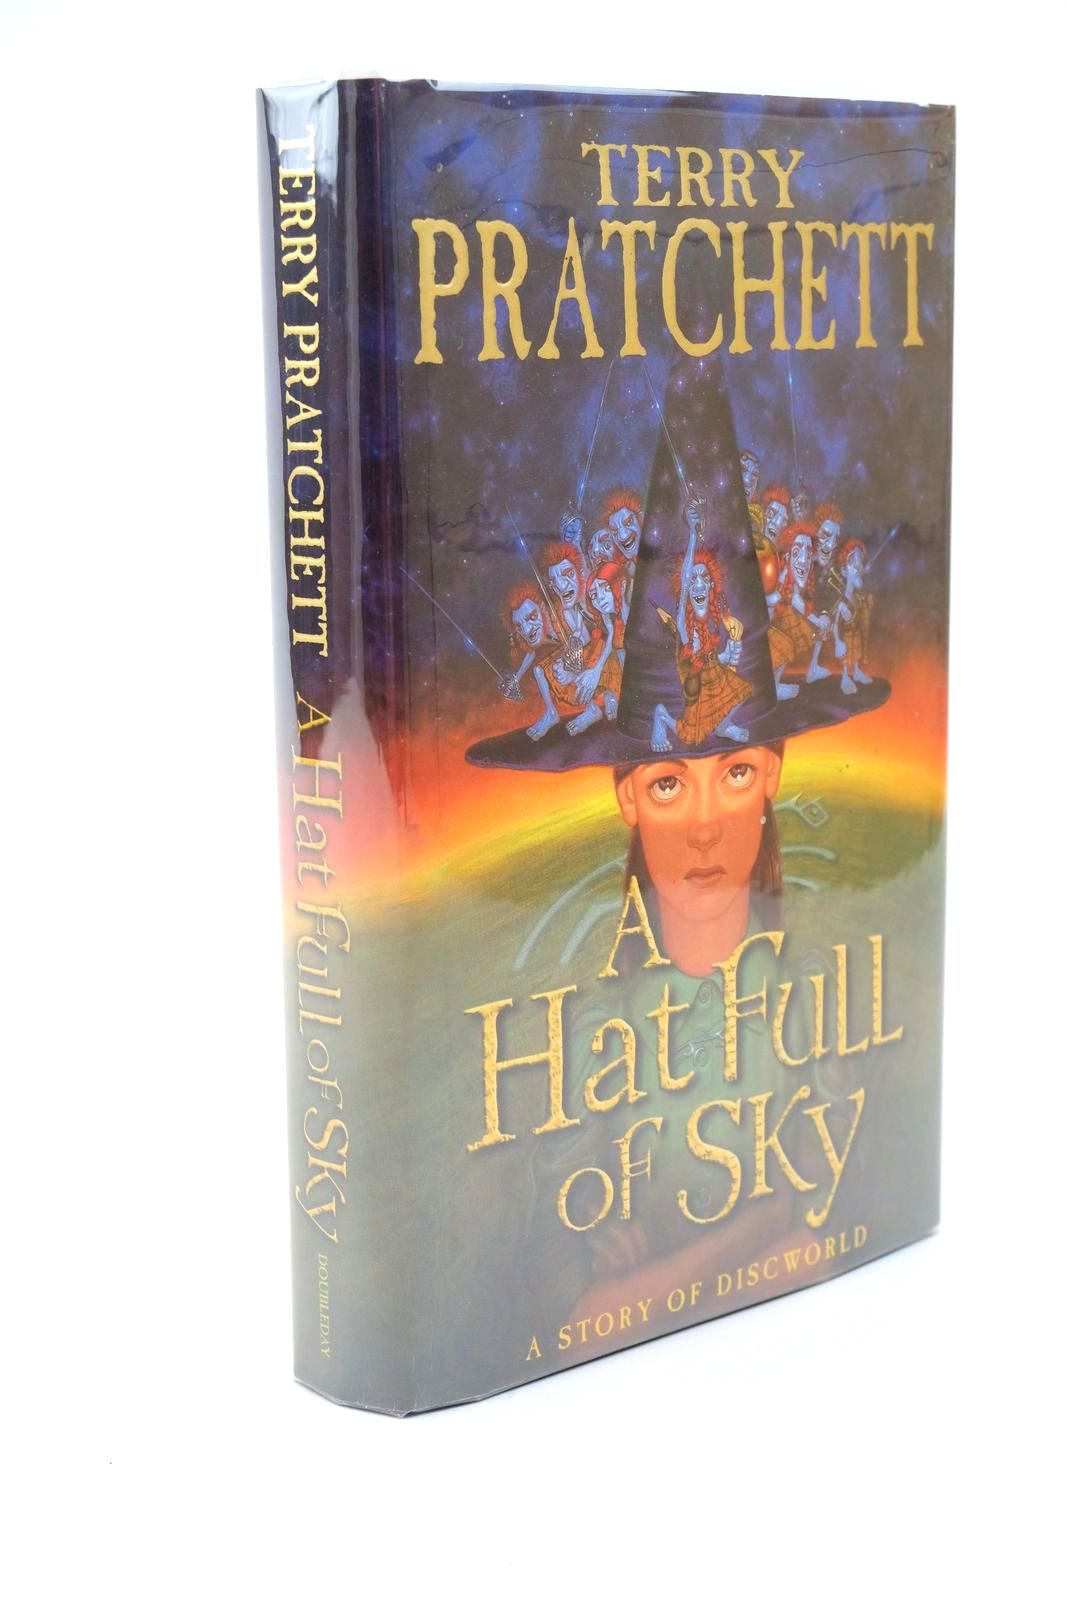 Photo of A HAT FULL OF SKY written by Pratchett, Terry published by Doubleday (STOCK CODE: 1323045)  for sale by Stella & Rose's Books